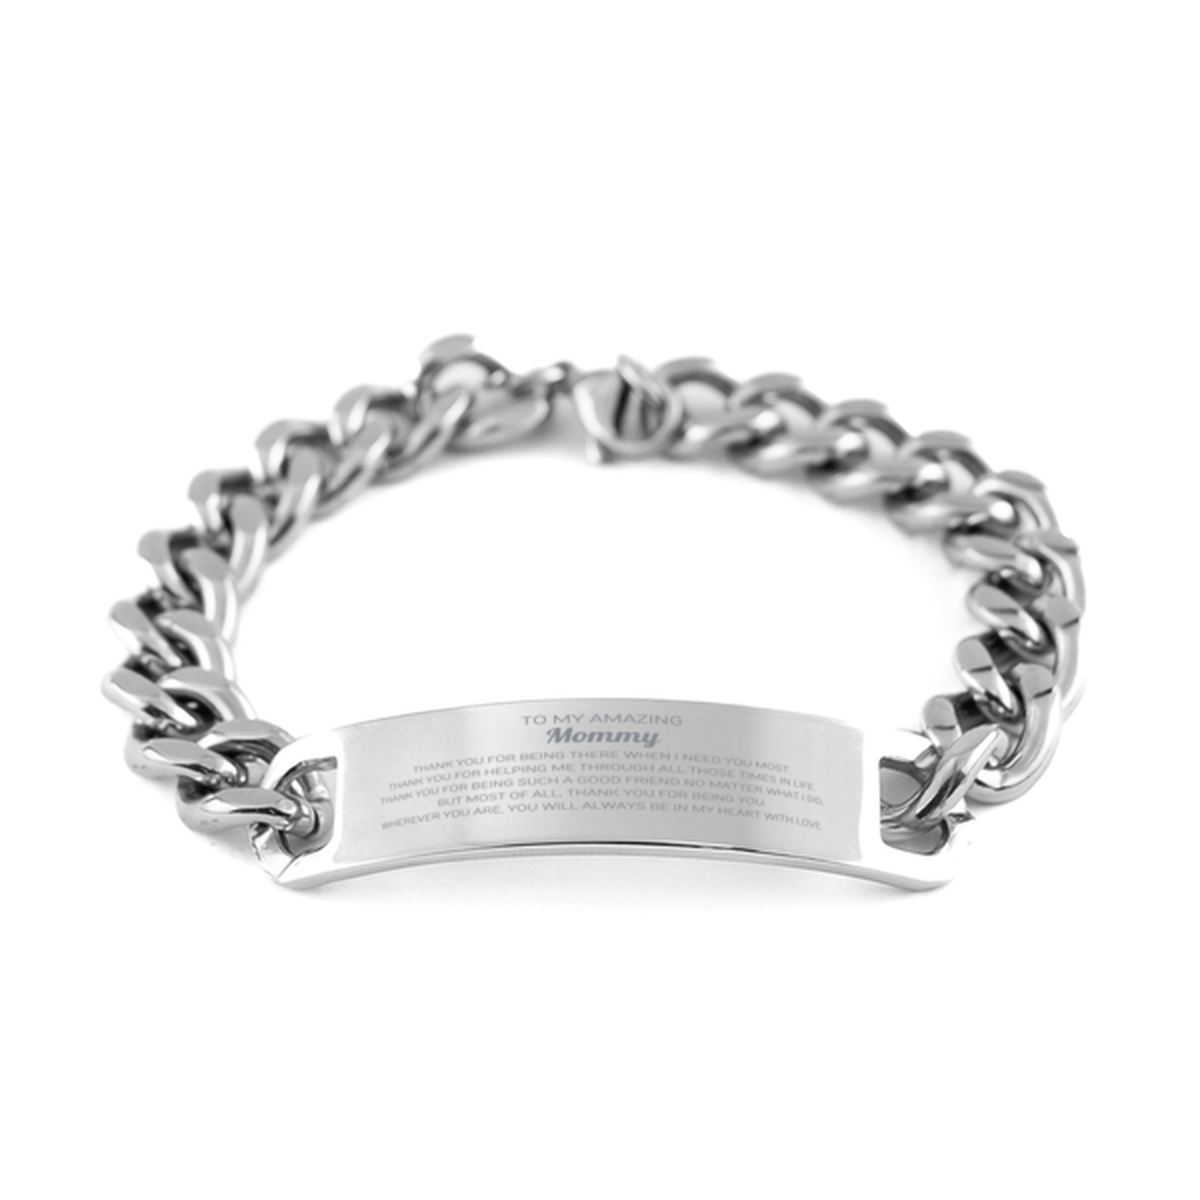 To My Amazing Mommy Cuban Chain Stainless Steel Bracelet, Thank you for being there, Thank You Gifts For Mommy, Birthday, Christmas Unique Gifts For Mommy